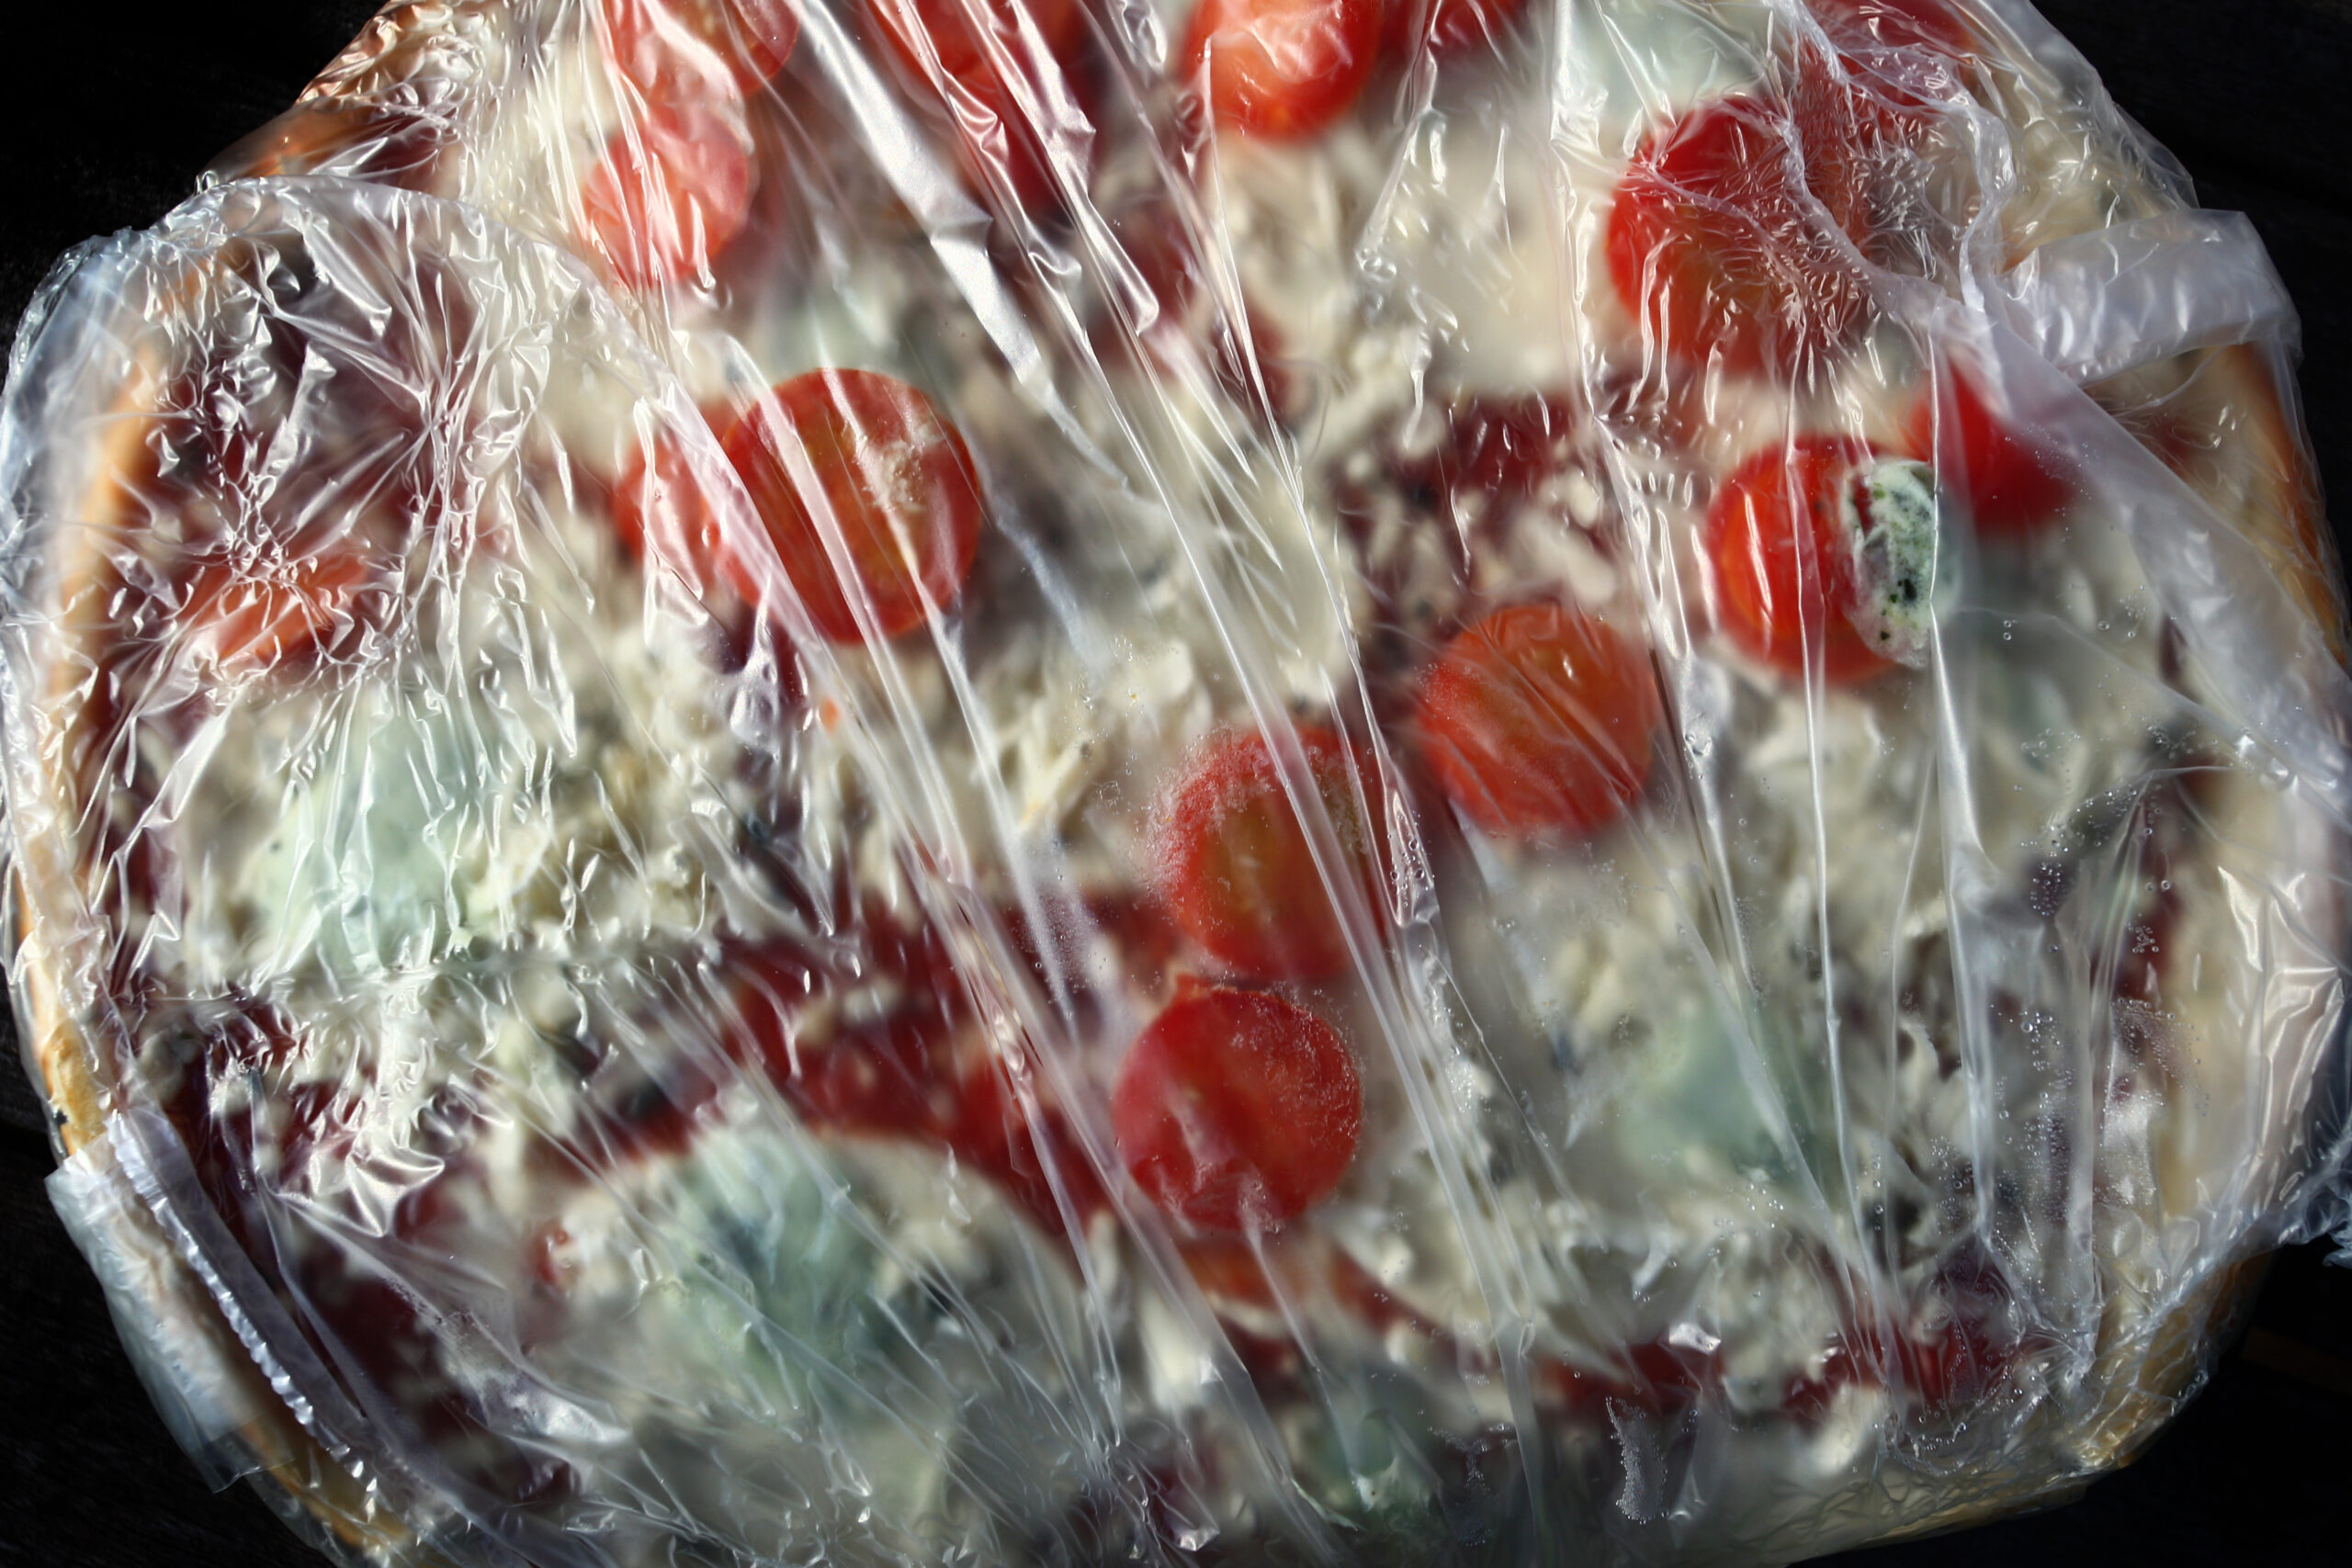 FILED - 18 May 2014, Bavaria, Kaufbeuren: A frozen ready-to-eat pizza wrapped in plastic film. Dema...